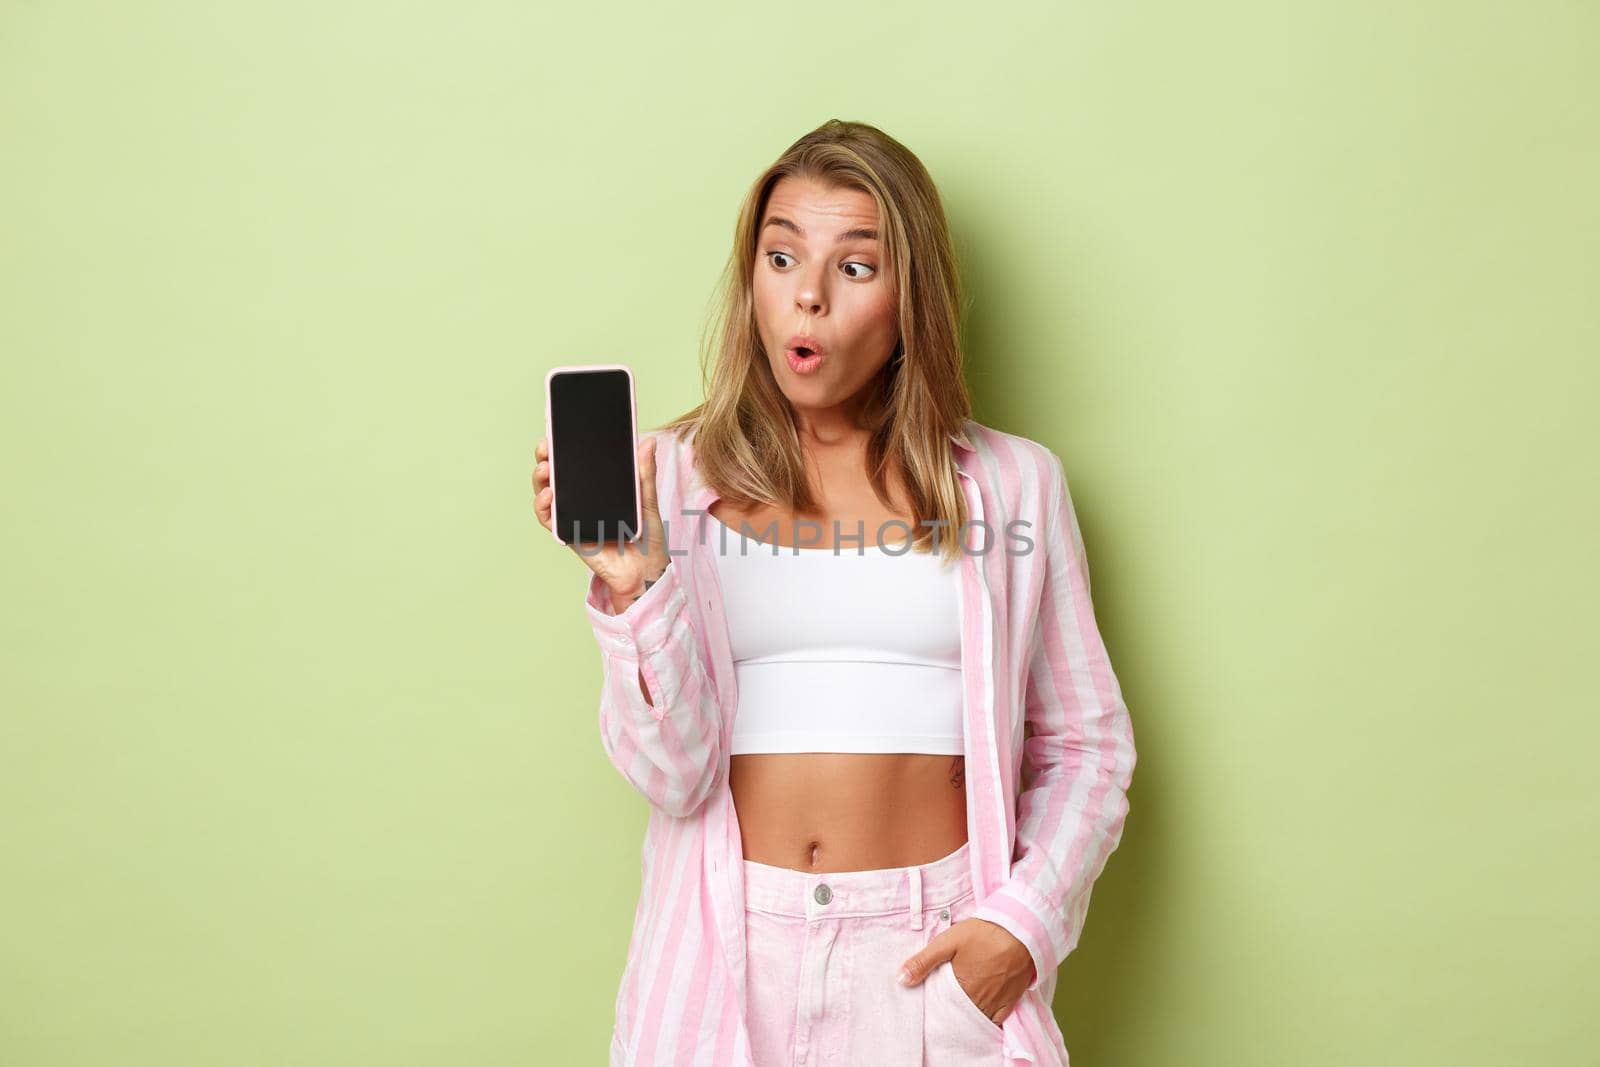 Image of blond attractive female model in pink shirt, showing smartphone screen and looking surprised, standing over green background.